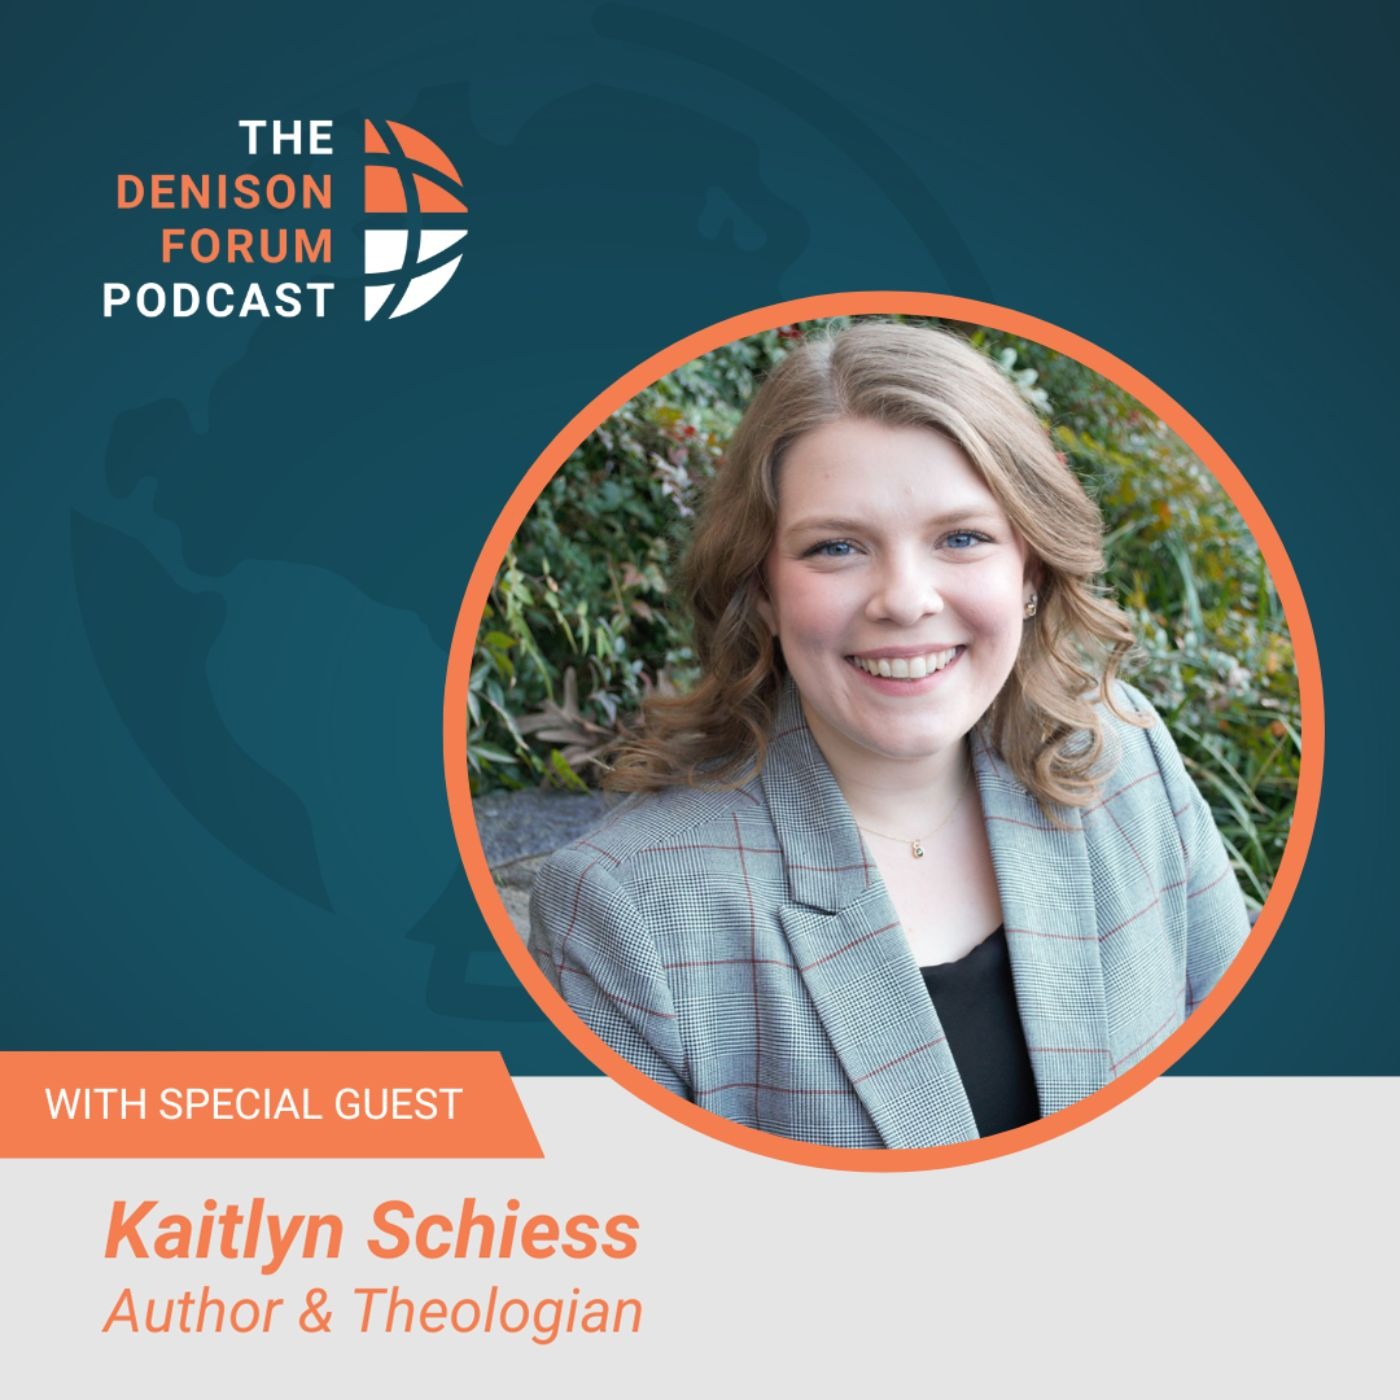 How does the Bible apply to today’s politics? With Kaitlyn Schiess